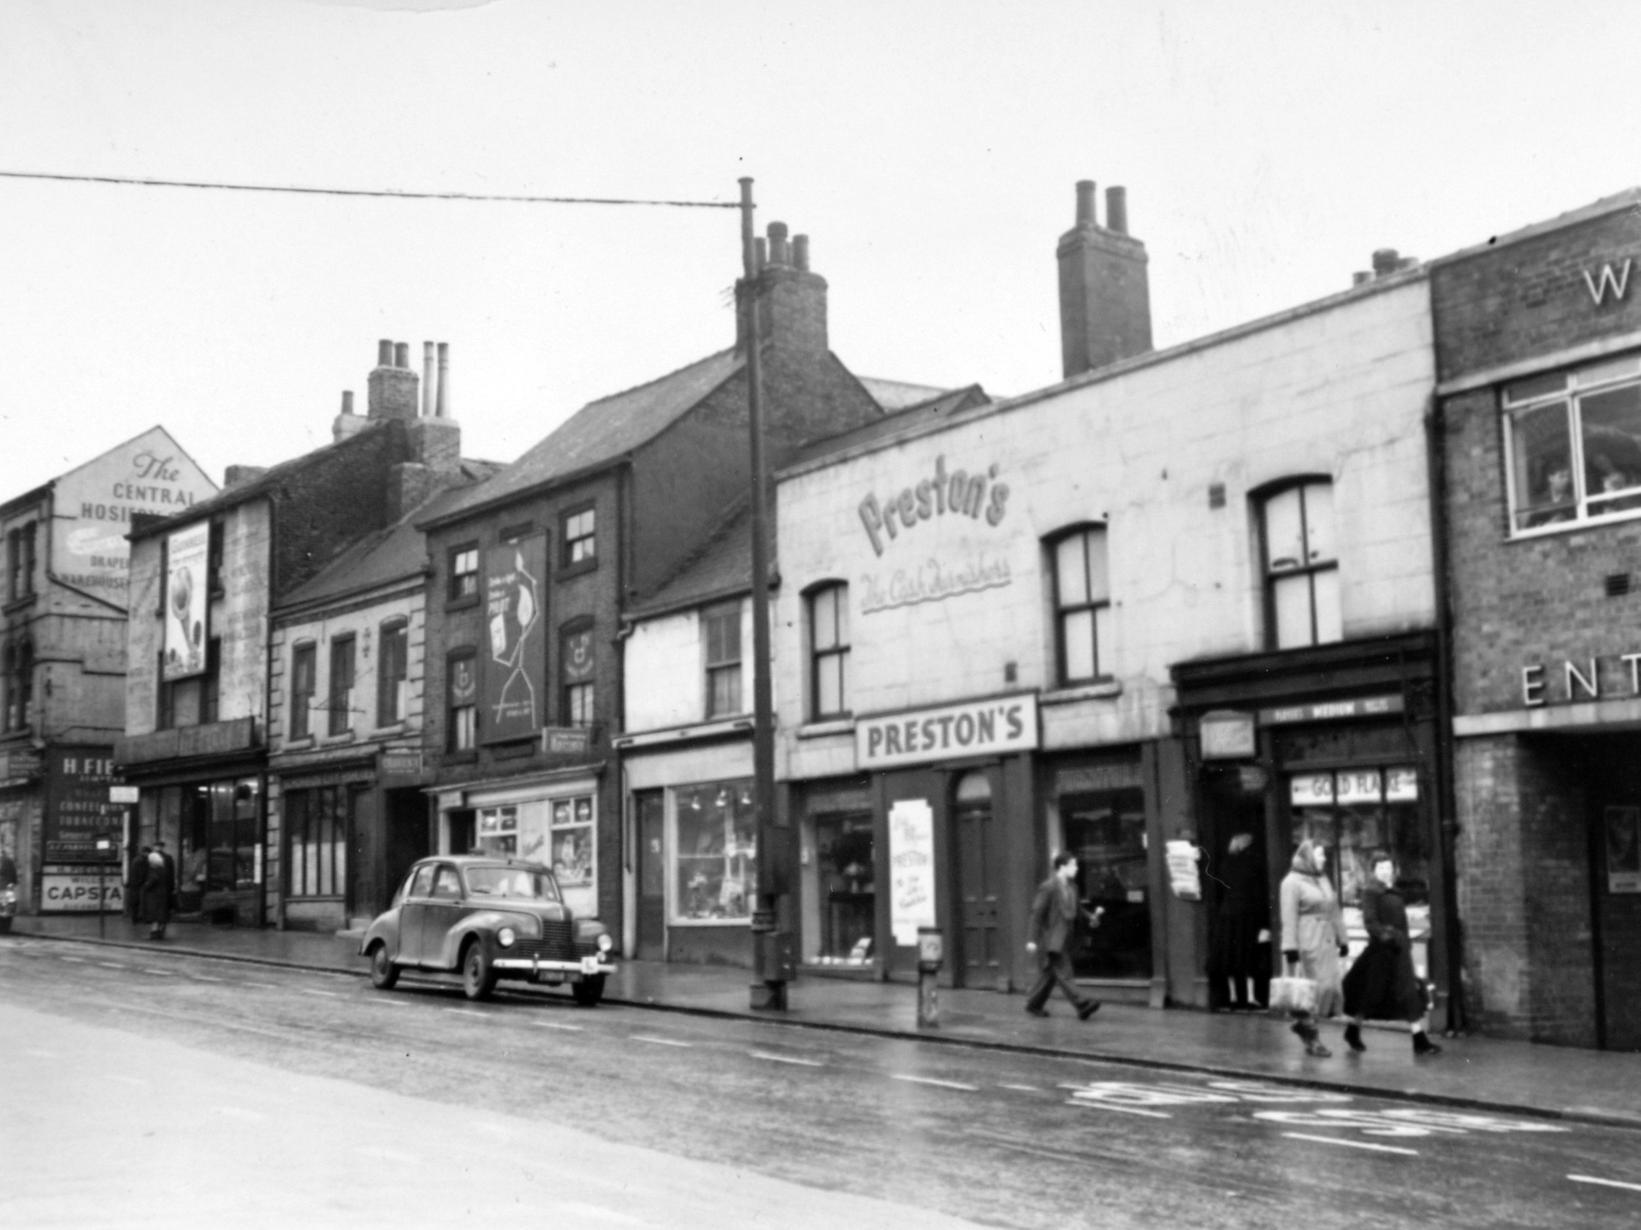 This property on Vicar Lane was due to demolished at the end of the 1950s.